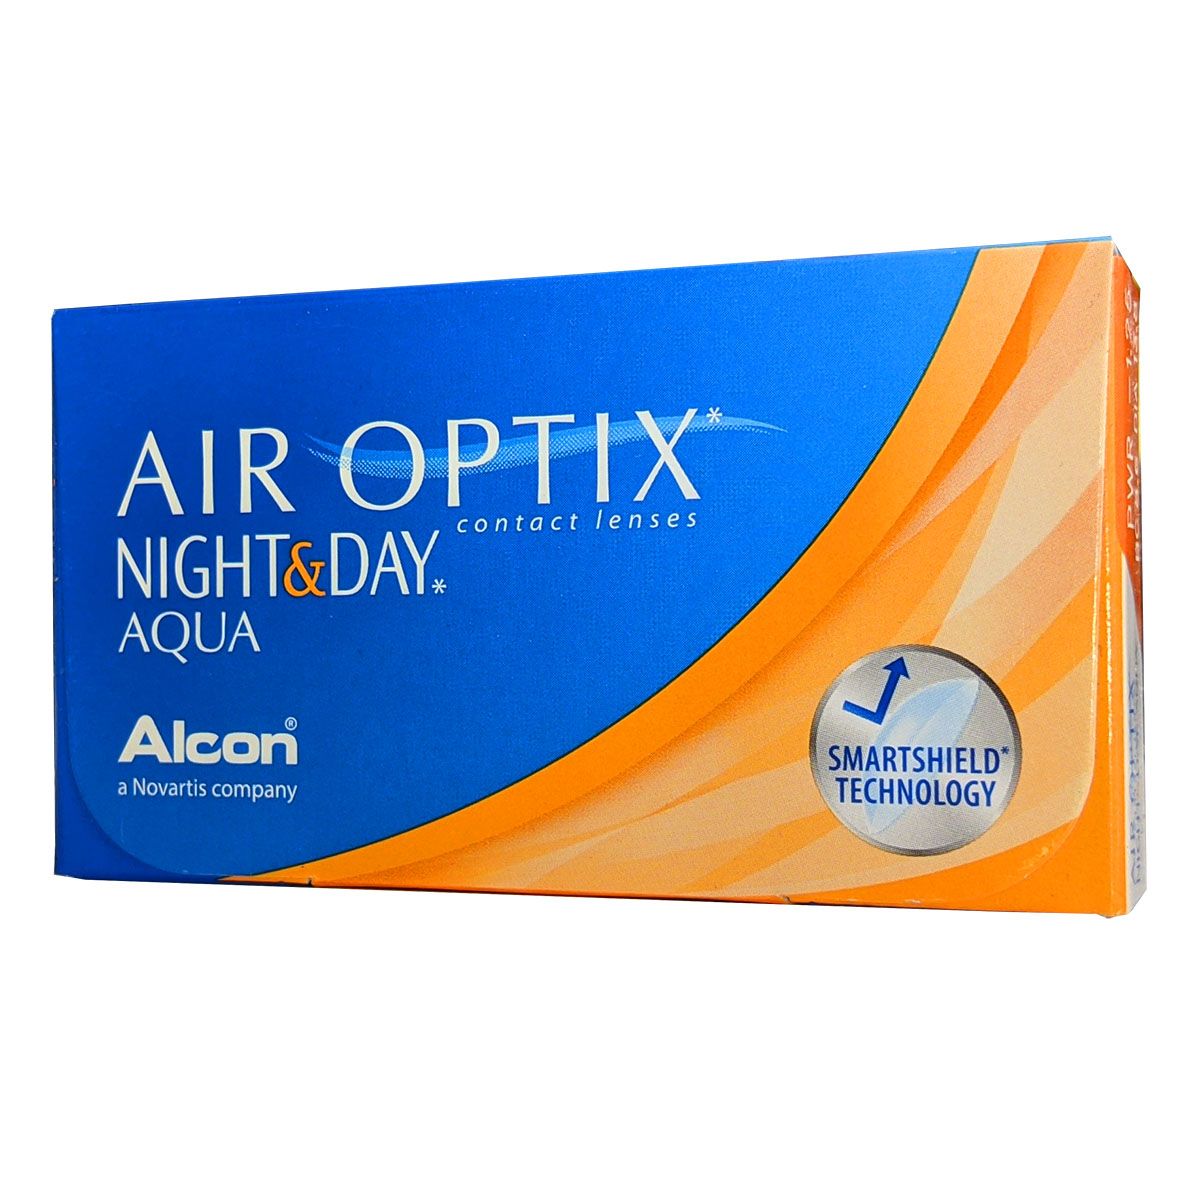 AIR OPTIX AQUA NIGHT & DAY MONTHLY DISPOSABLE SILICON HYDROGEL CONTACT LENSES (6 LENSES)